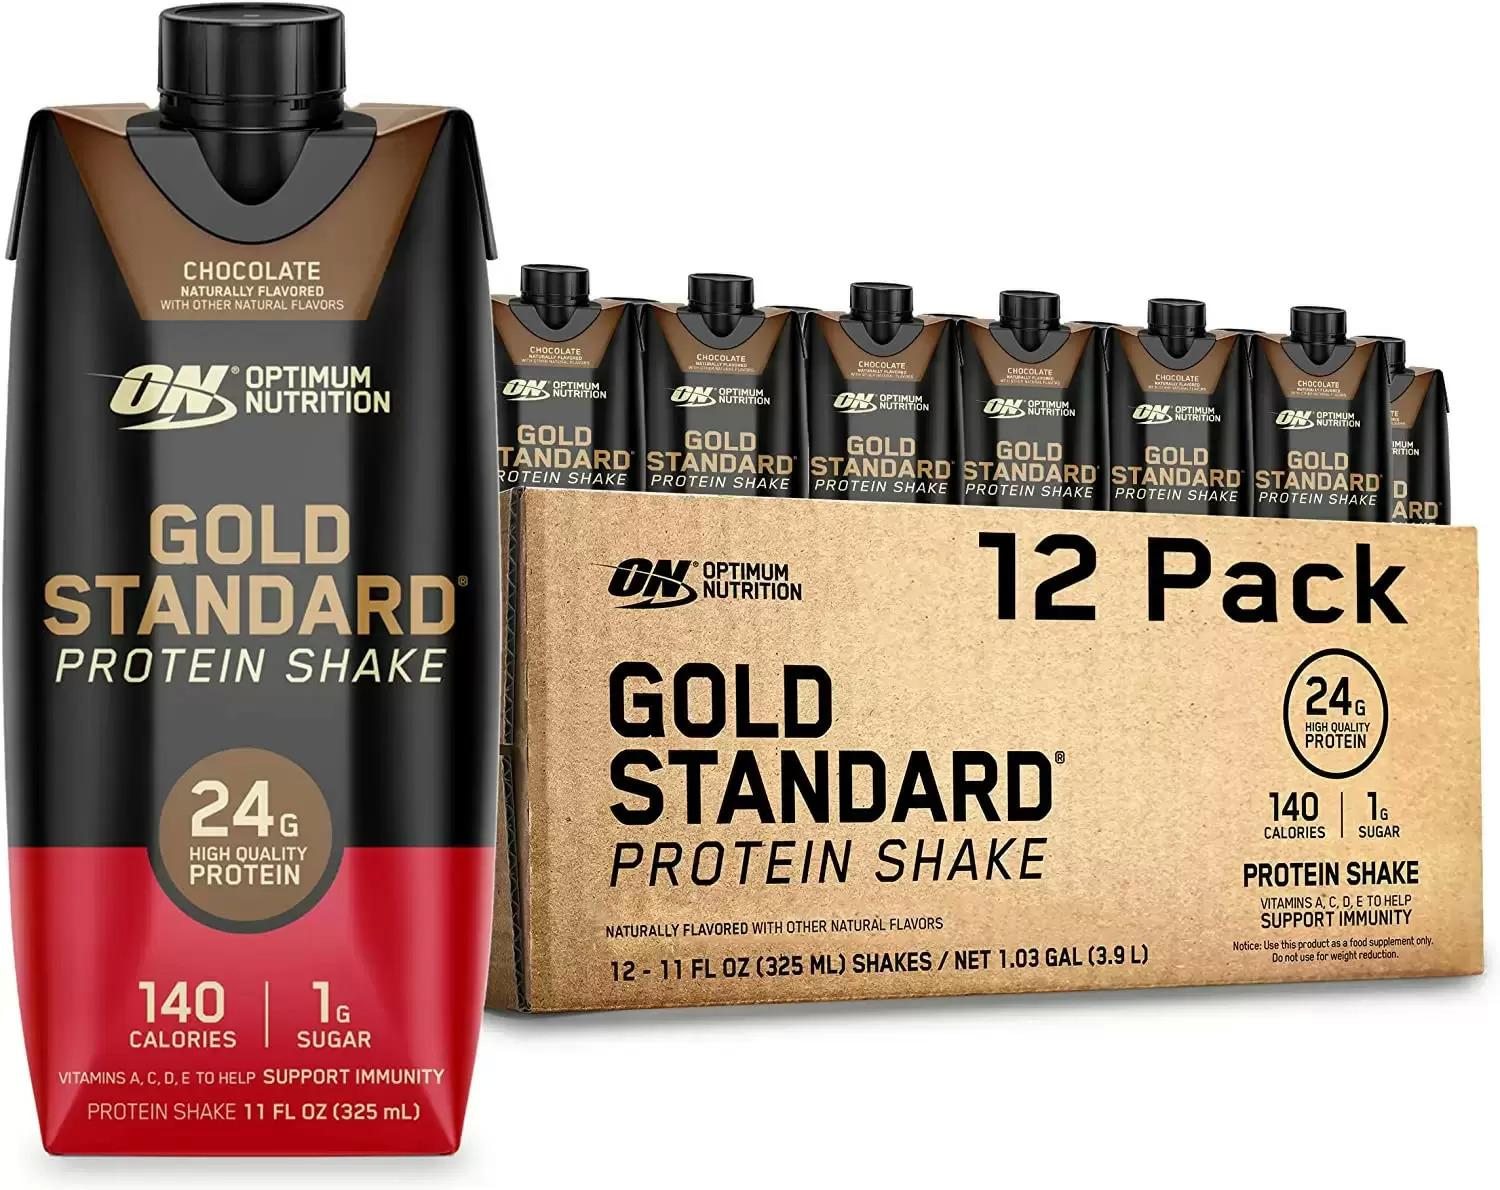 Optimum Nutrition Gold Standard Protein Chocolate Shake 12 Pack for $14.65 Shipped